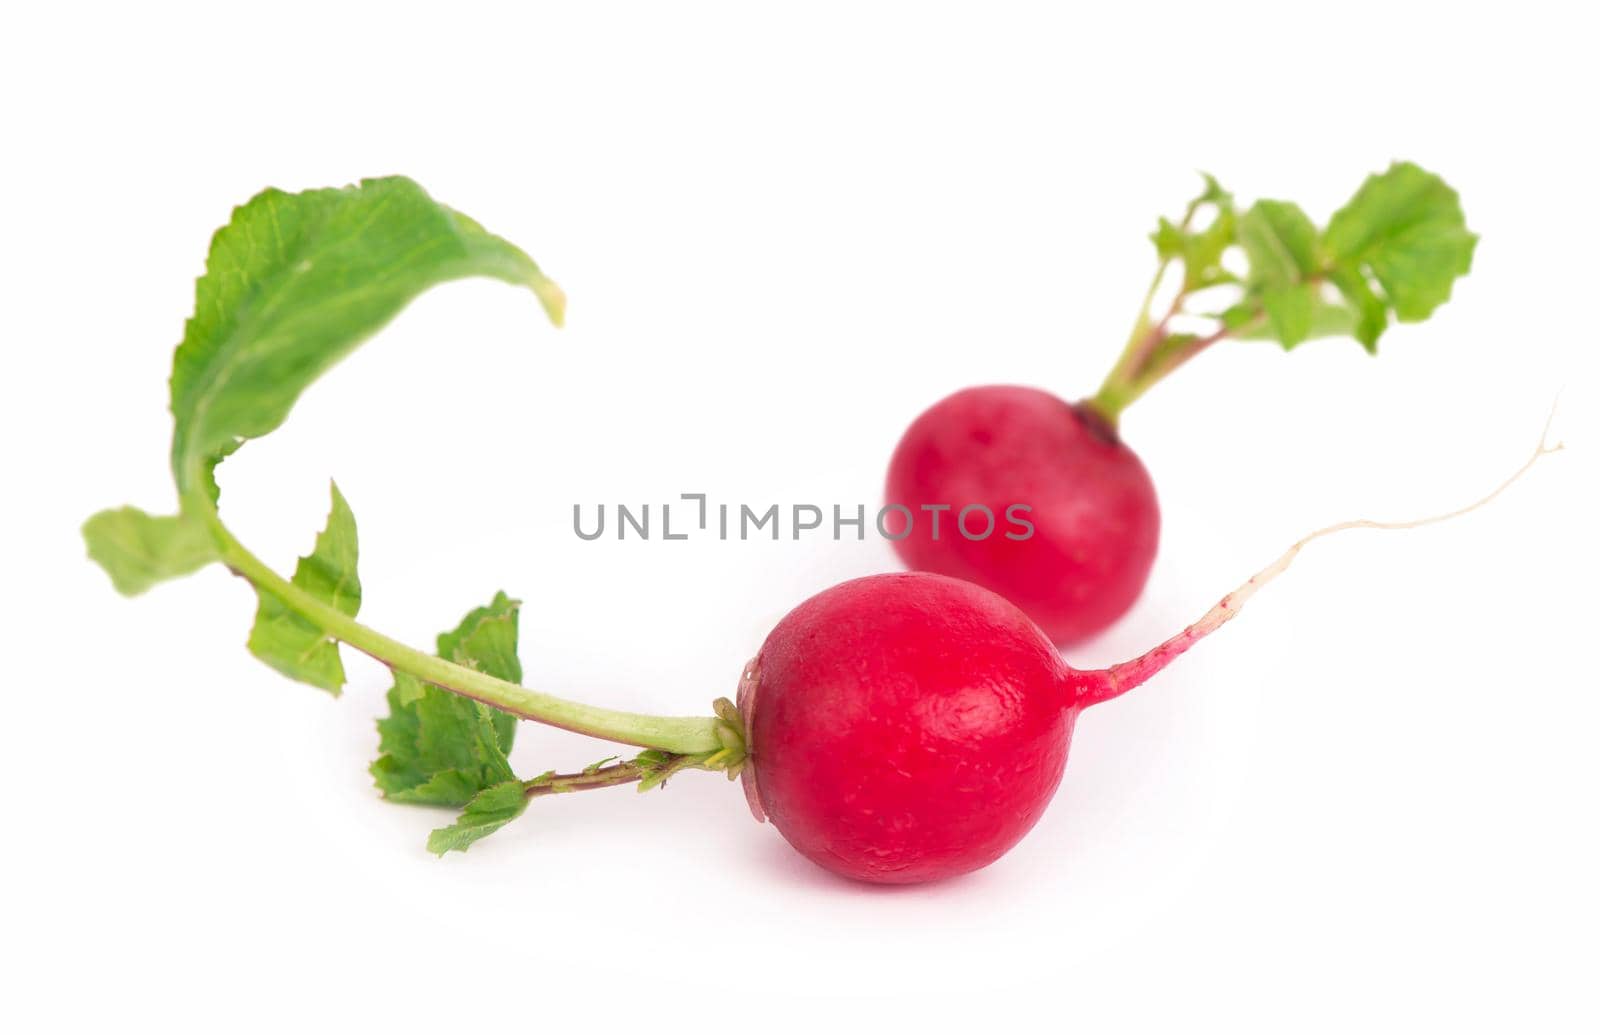 Radis isolated on white background. Fresh radish root bundle, pile of red radishes with green leaves top view by aprilphoto